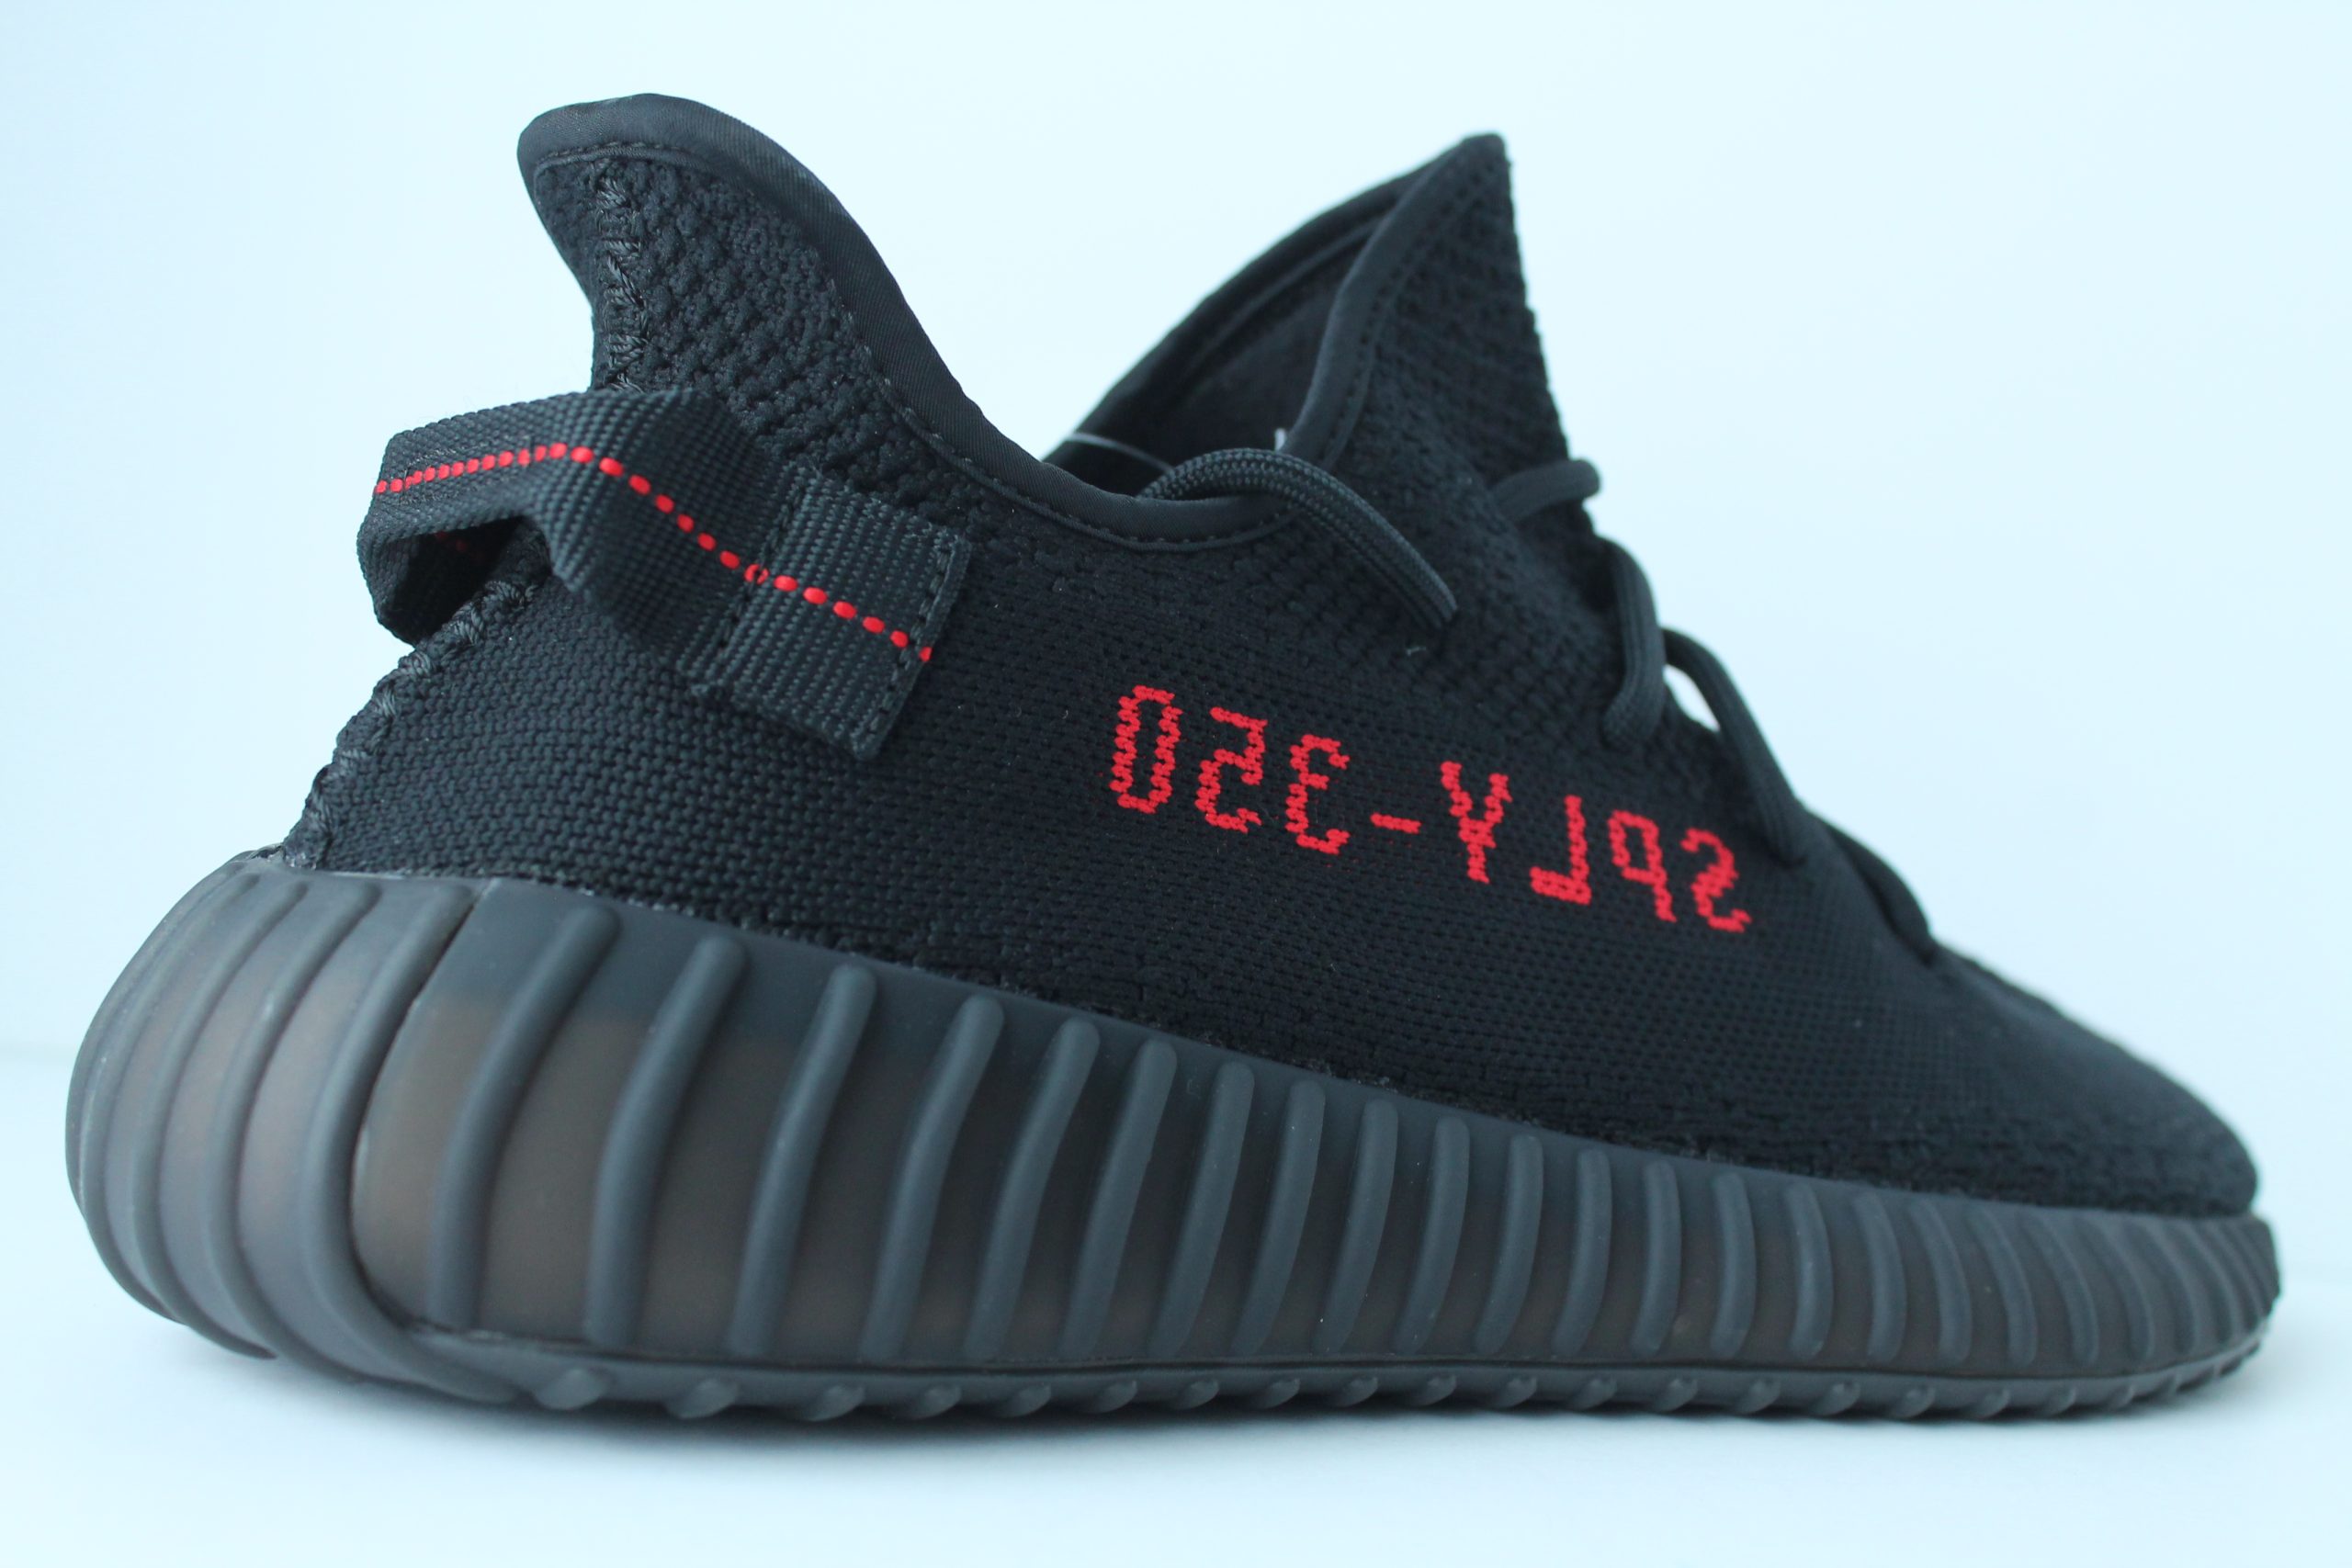 The Ultimate Guide to Spotting High-Quality Yeezy Replicas